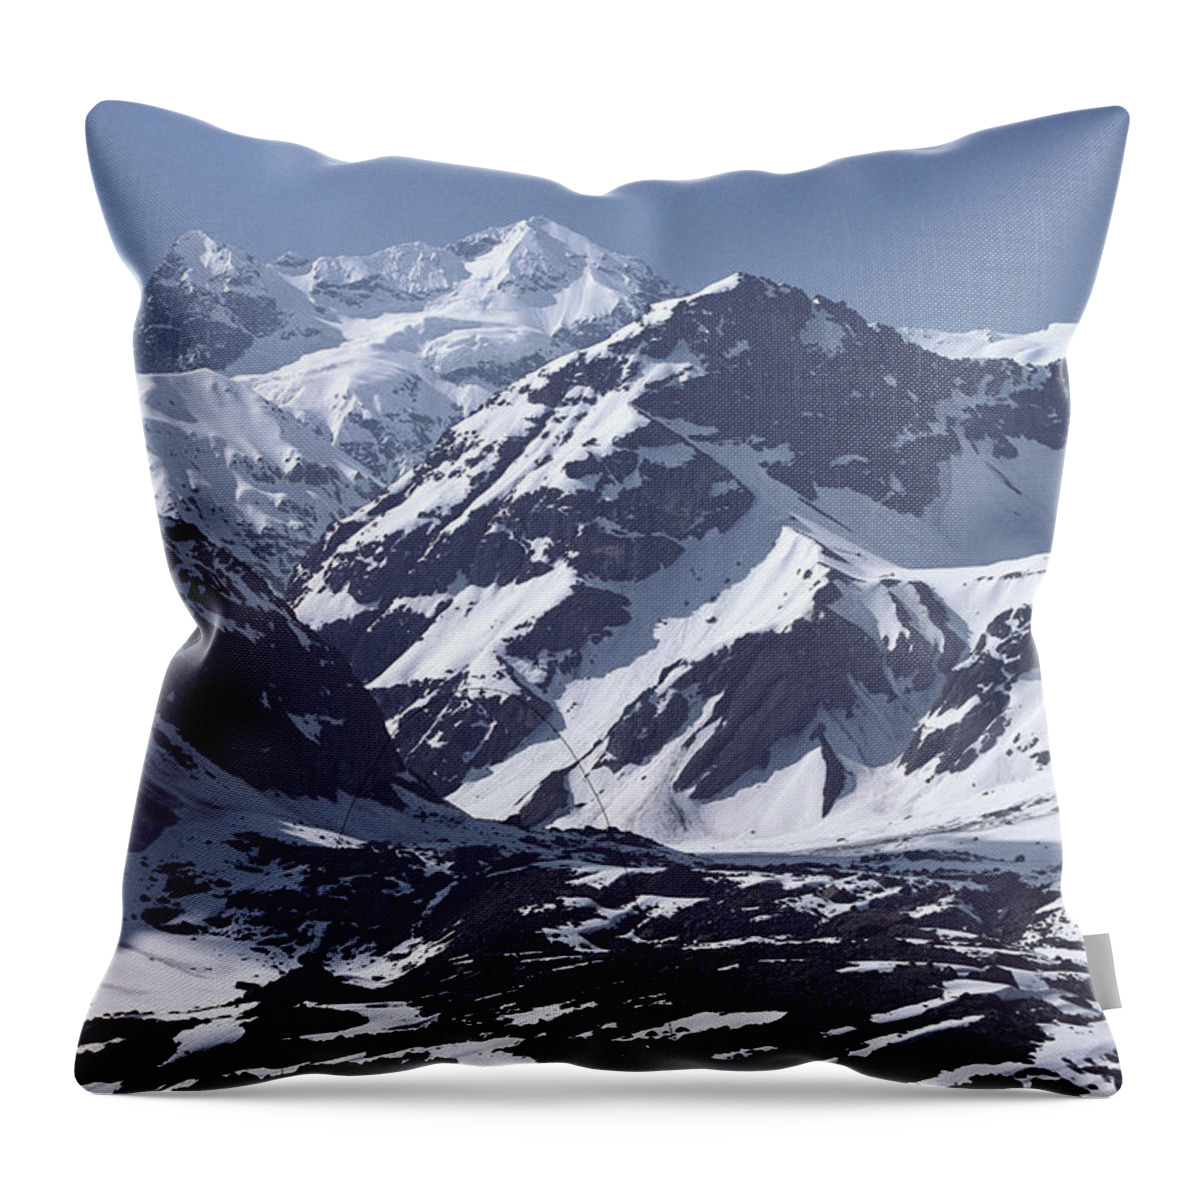 Andes Mountains Throw Pillow featuring the photograph Andes Mountains Near Santiago, Chile by Larry Minden